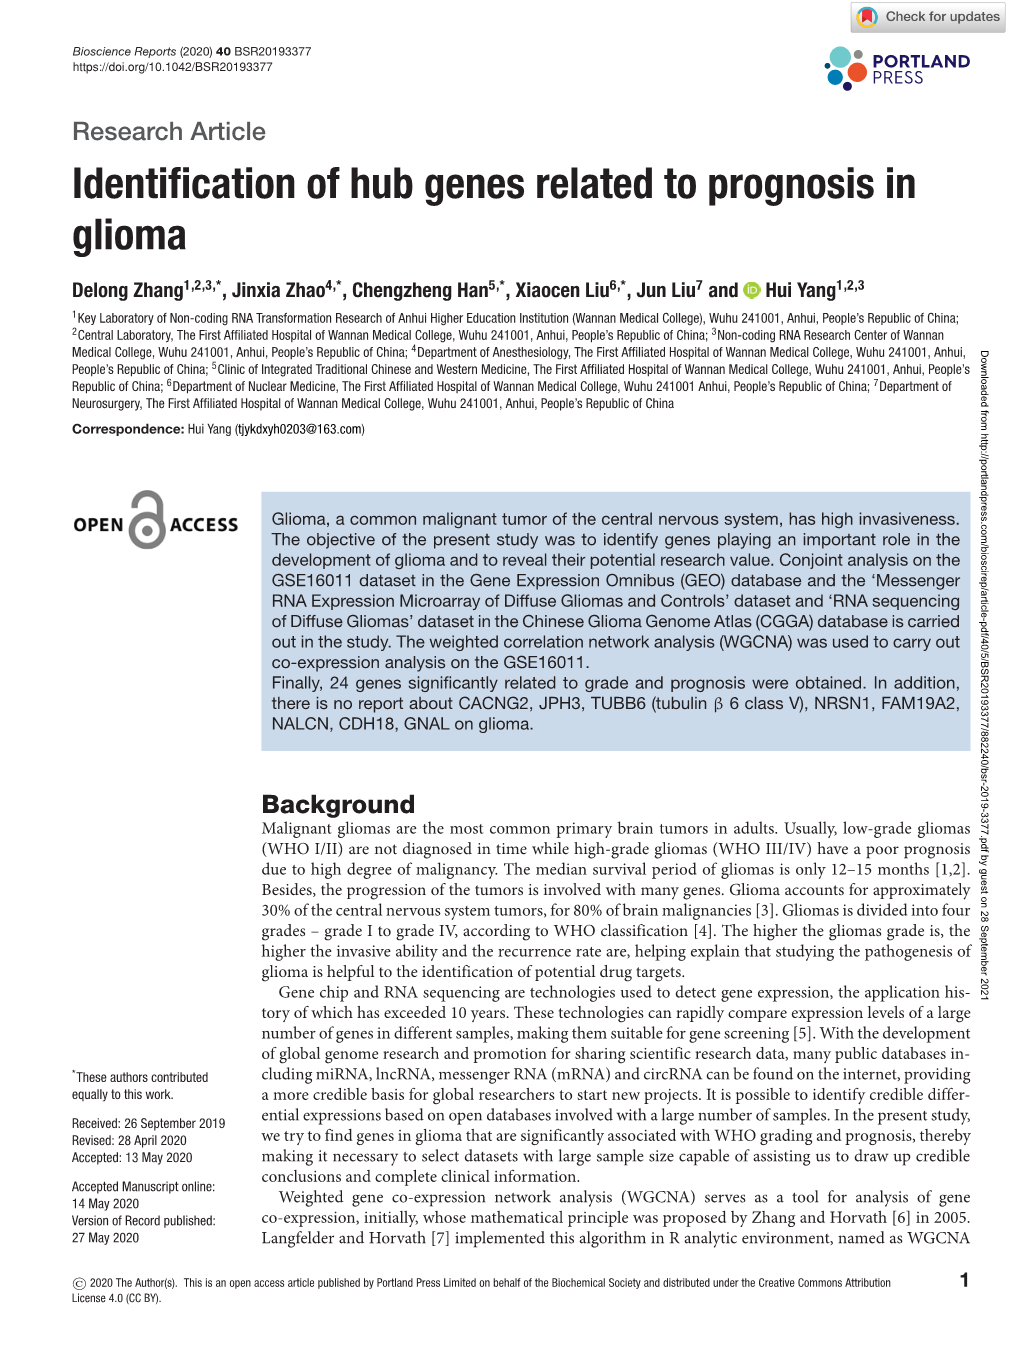 Identification of Hub Genes Related to Prognosis in Glioma